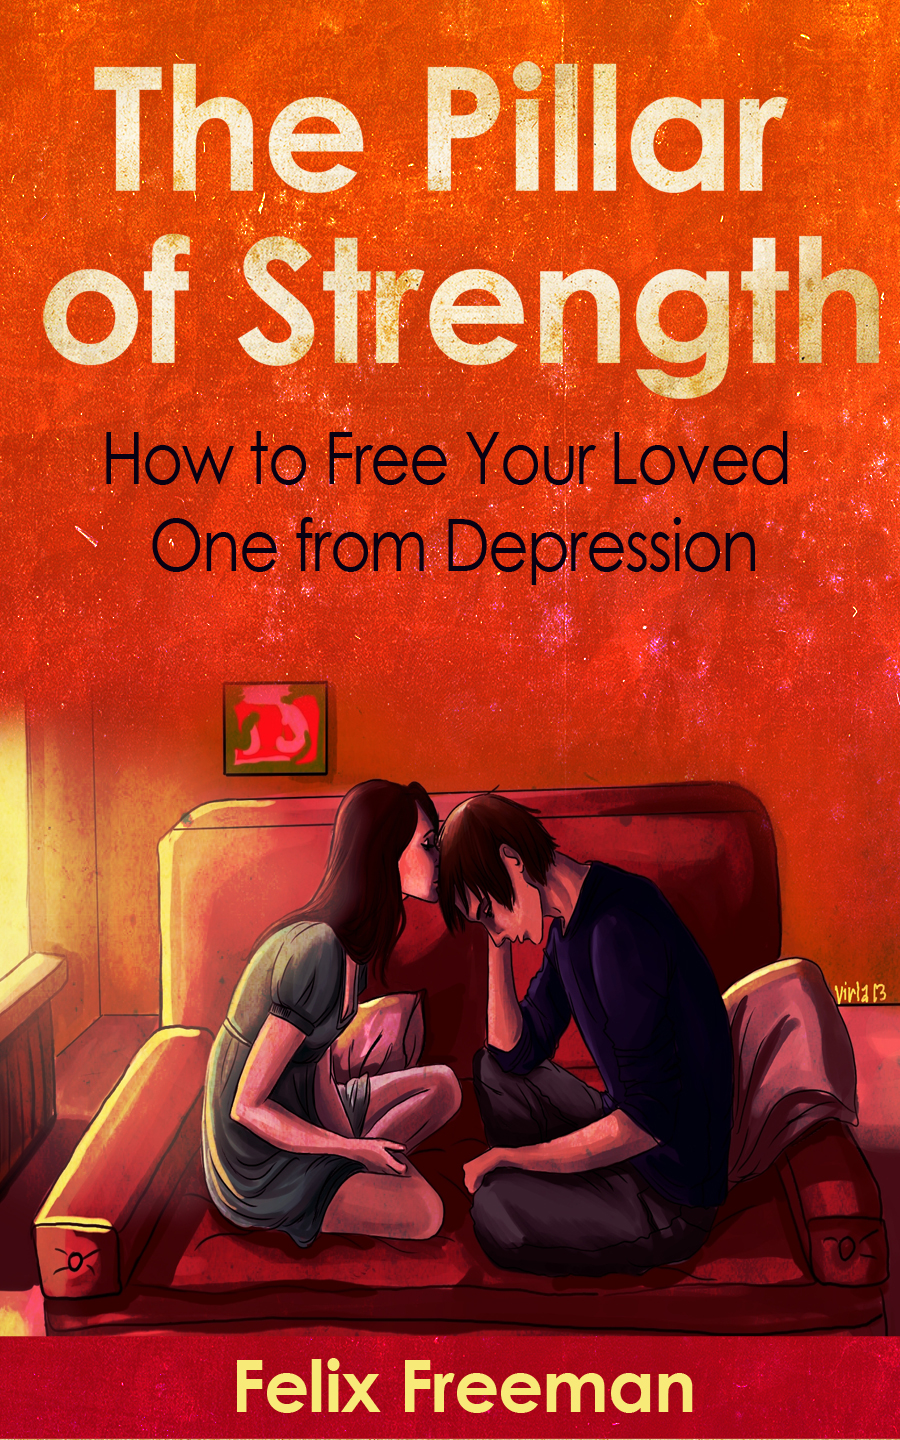 how-to-free-your-loved-one-from-depression-ebook-announces-new-updates